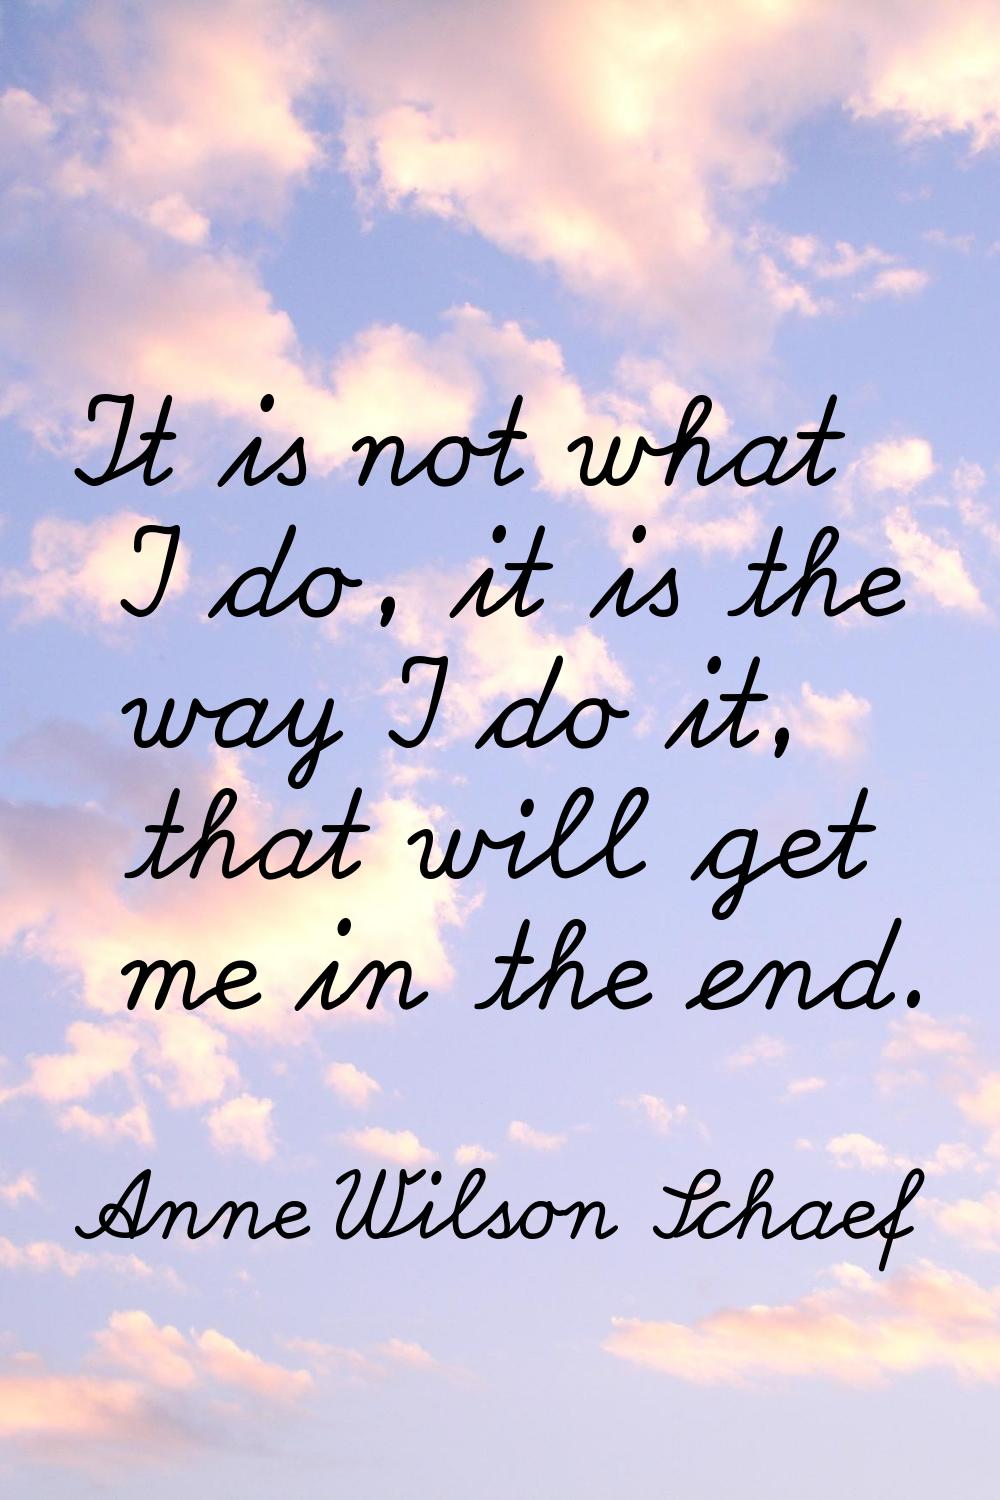 It is not what I do, it is the way I do it, that will get me in the end.